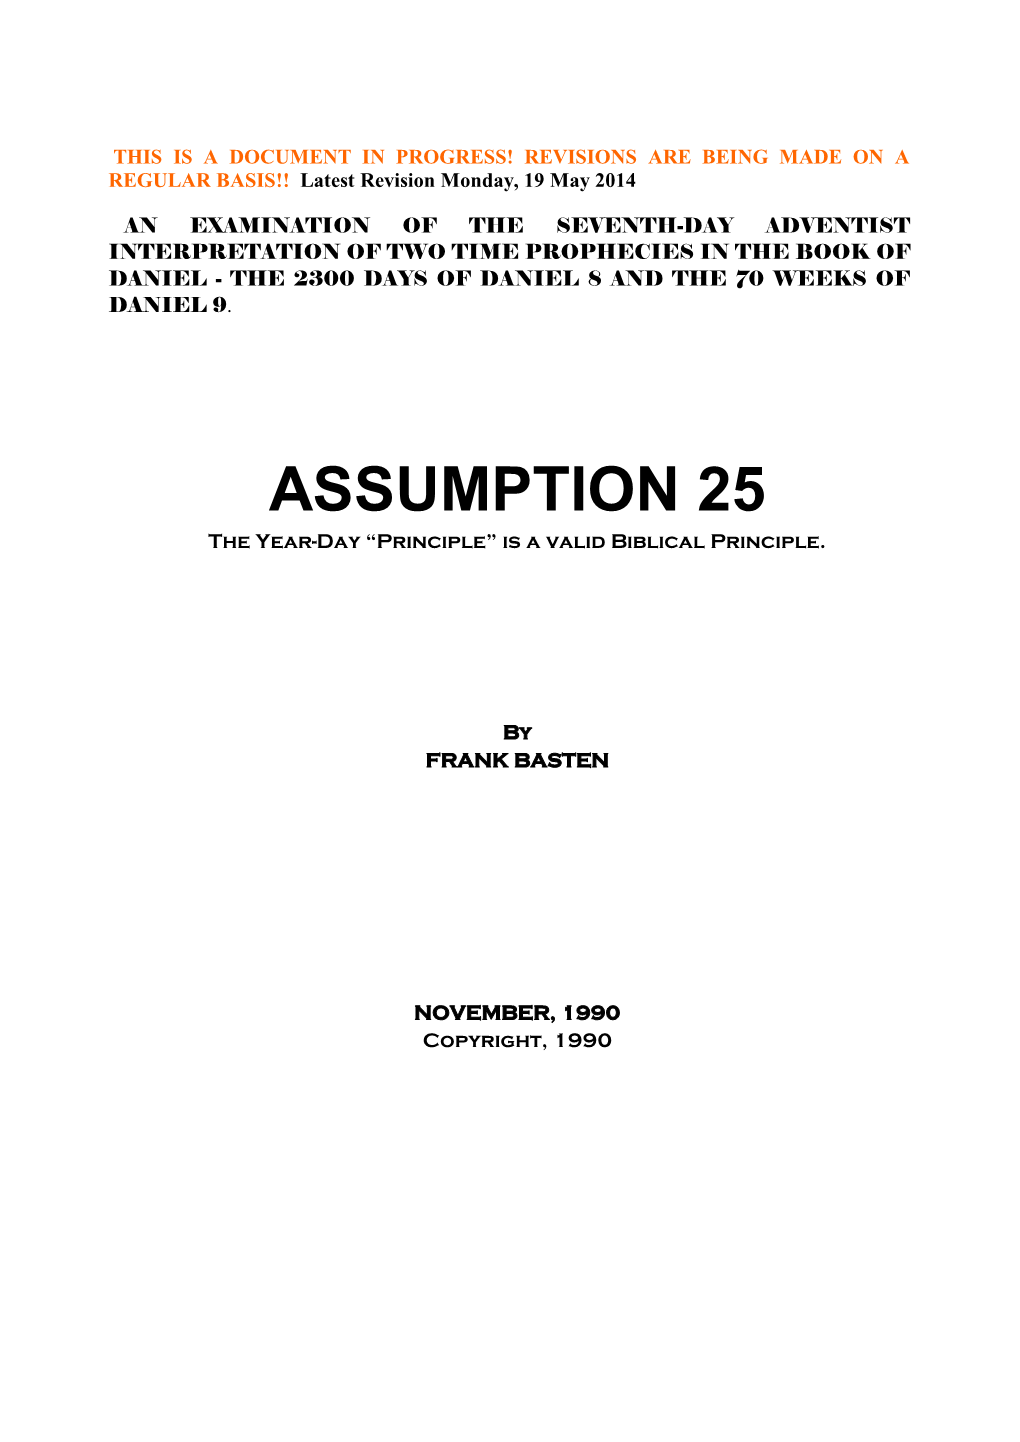 ASSUMPTION 25 the Year-Day “Principle” Is a Valid Biblical Principle